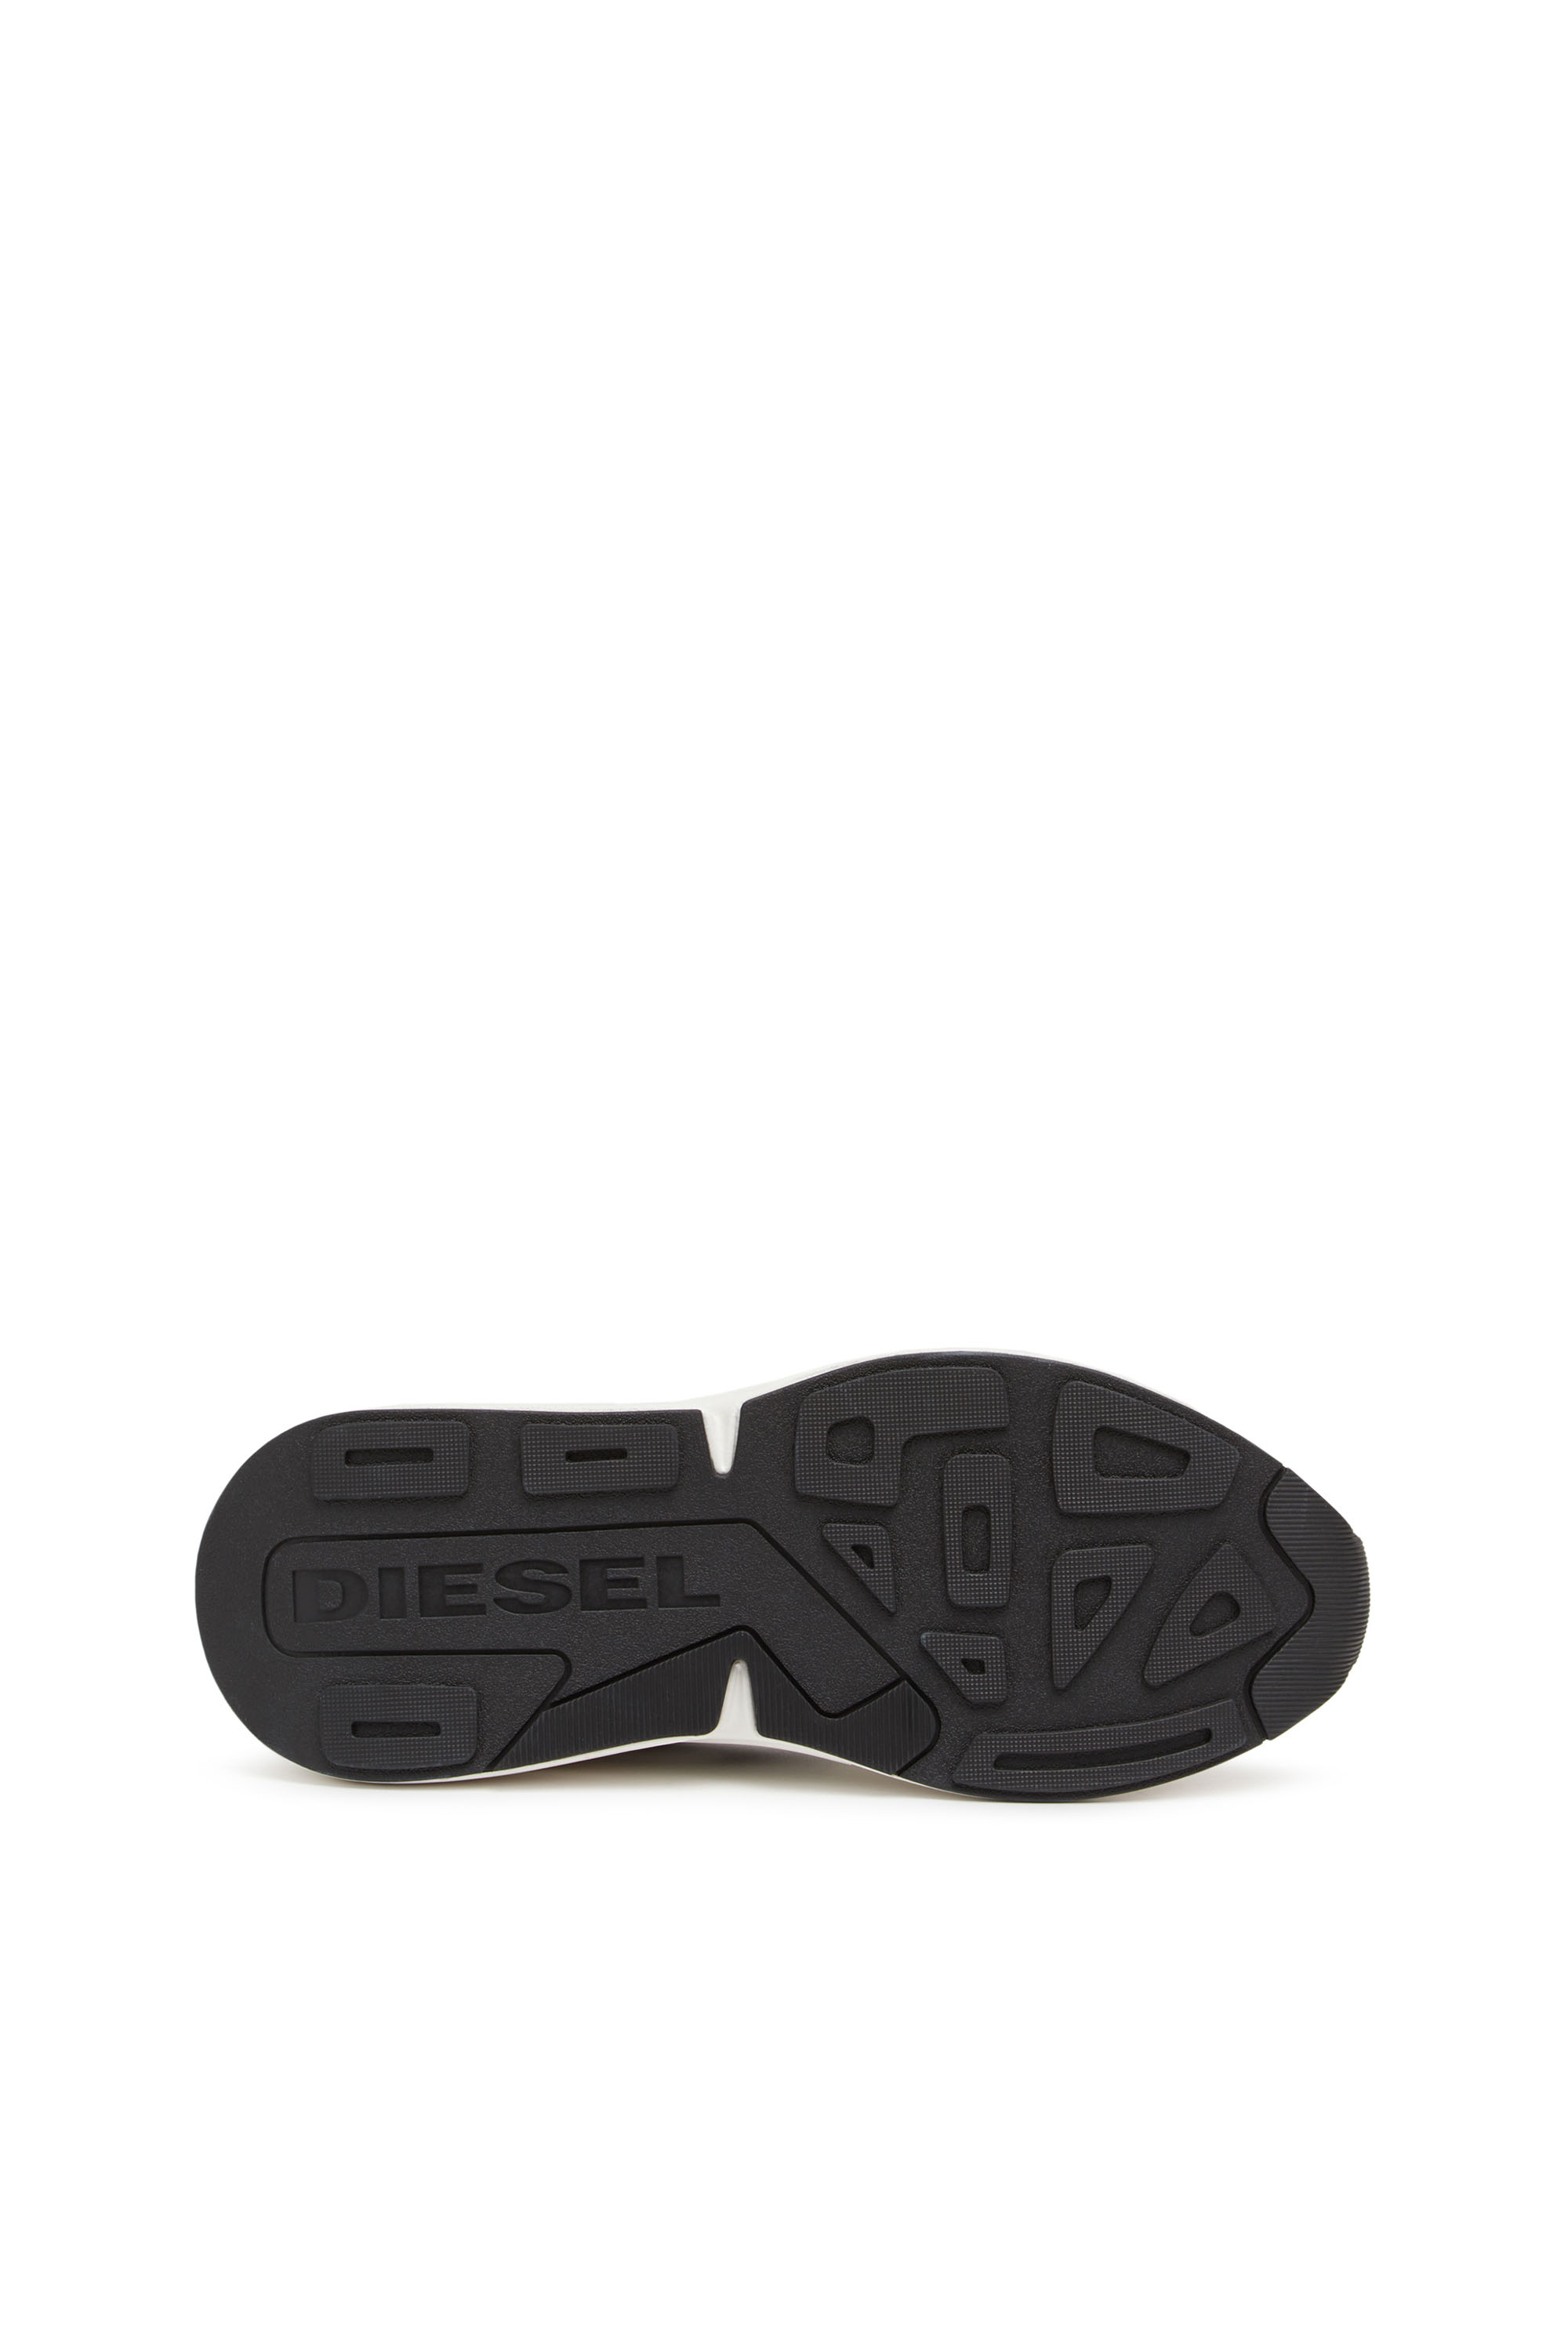 Mens and Womens Diesel Black Gold Collection